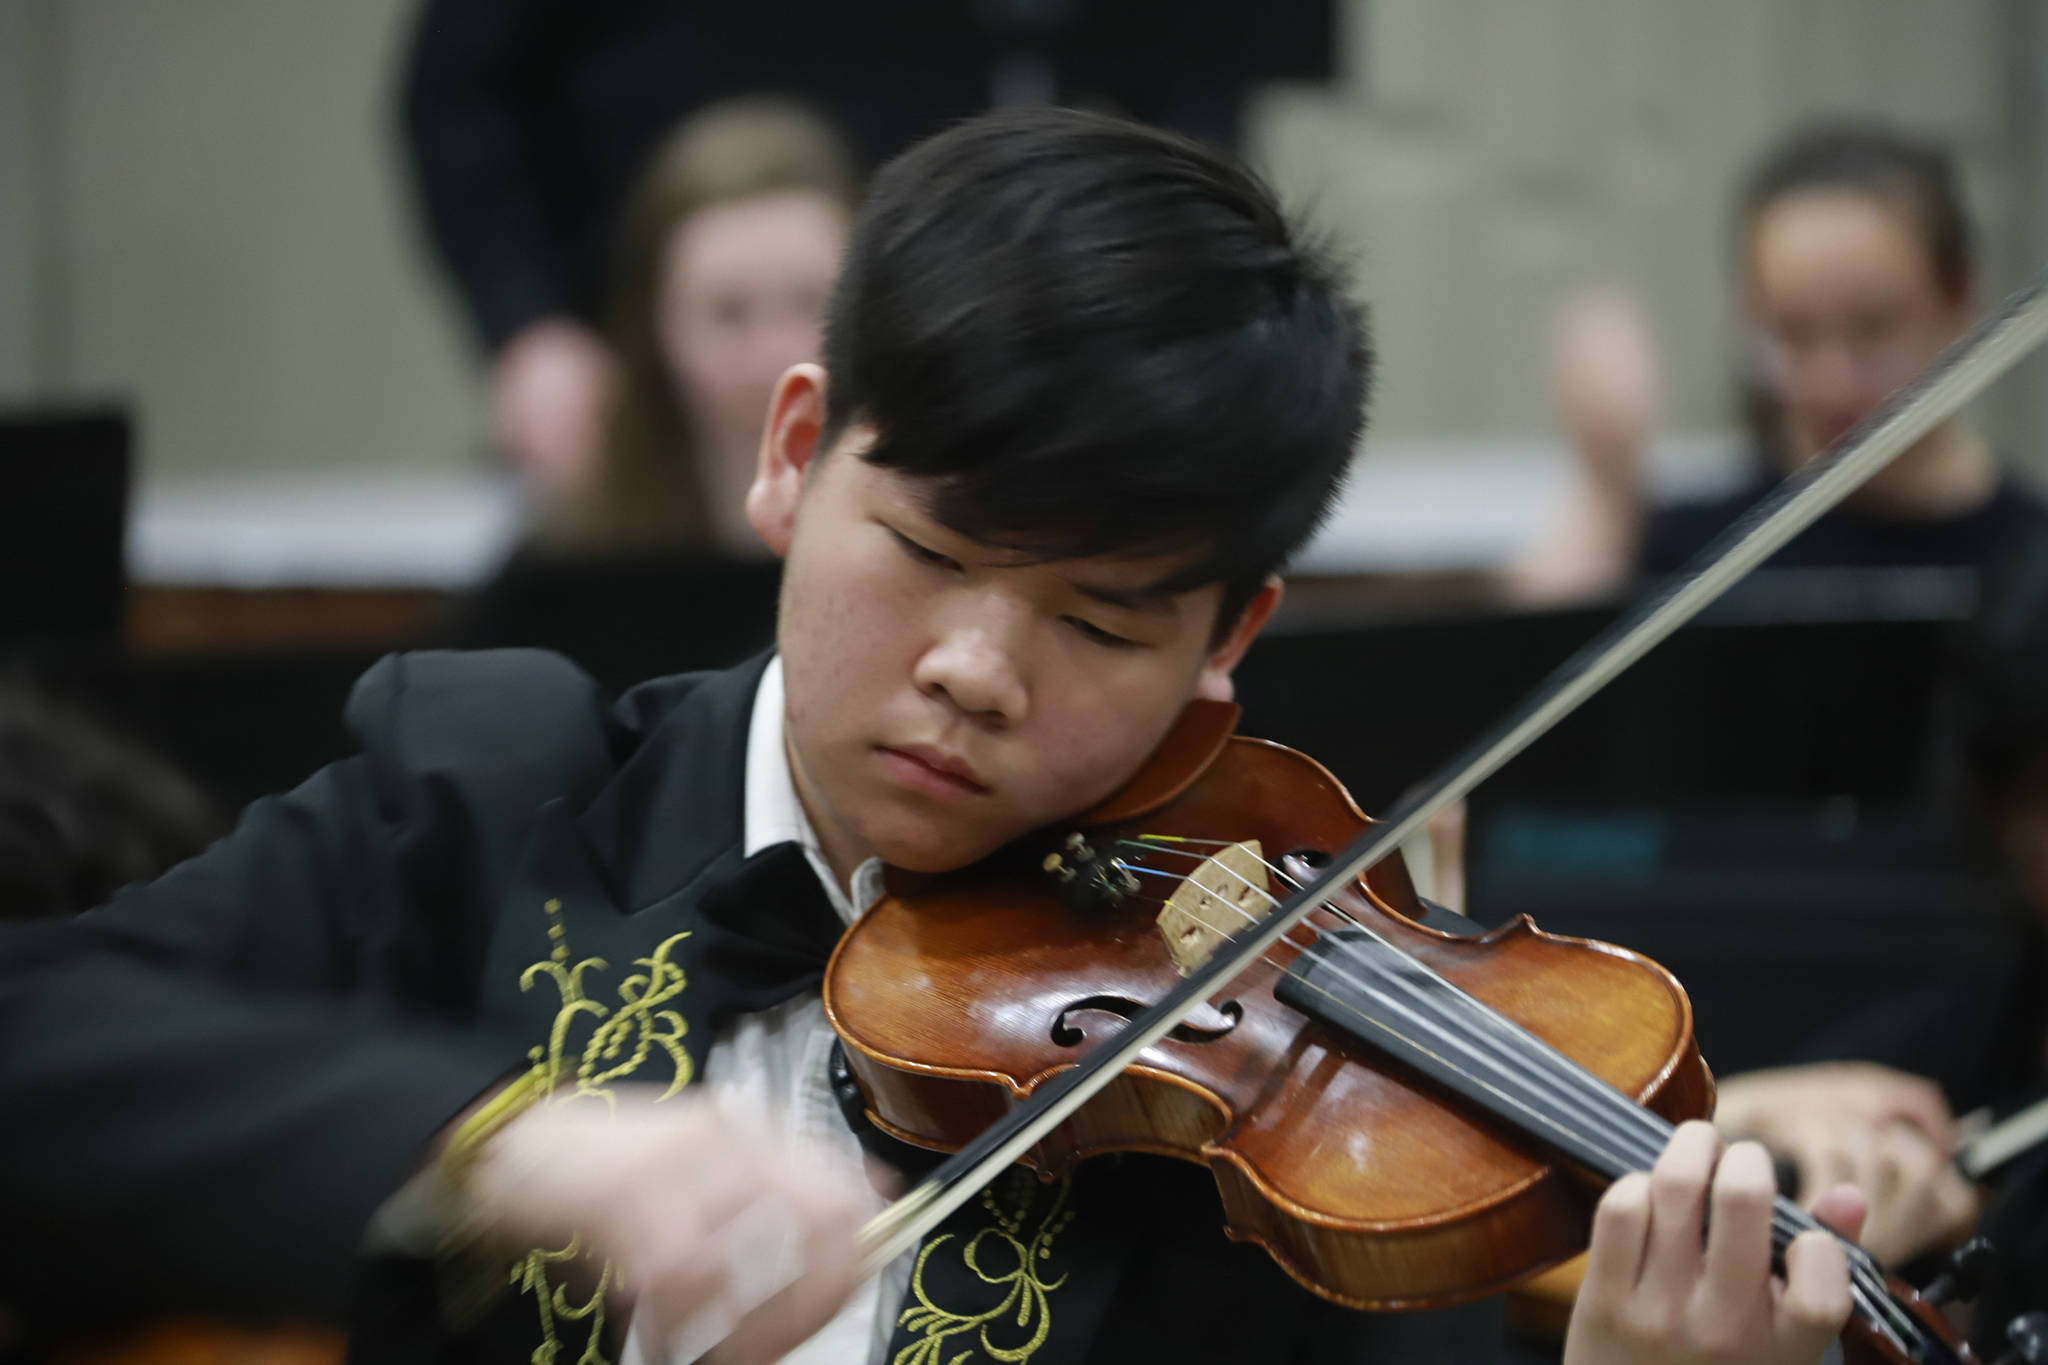 Youth solo competition winner 15-year-old Alexander Yu, seen in this photo playing violin, will also join the Juneau Symphony Orchestra for Sarasate’s “Zigeunerweisen.” (Courtesy Photo | Juneau Symphony)